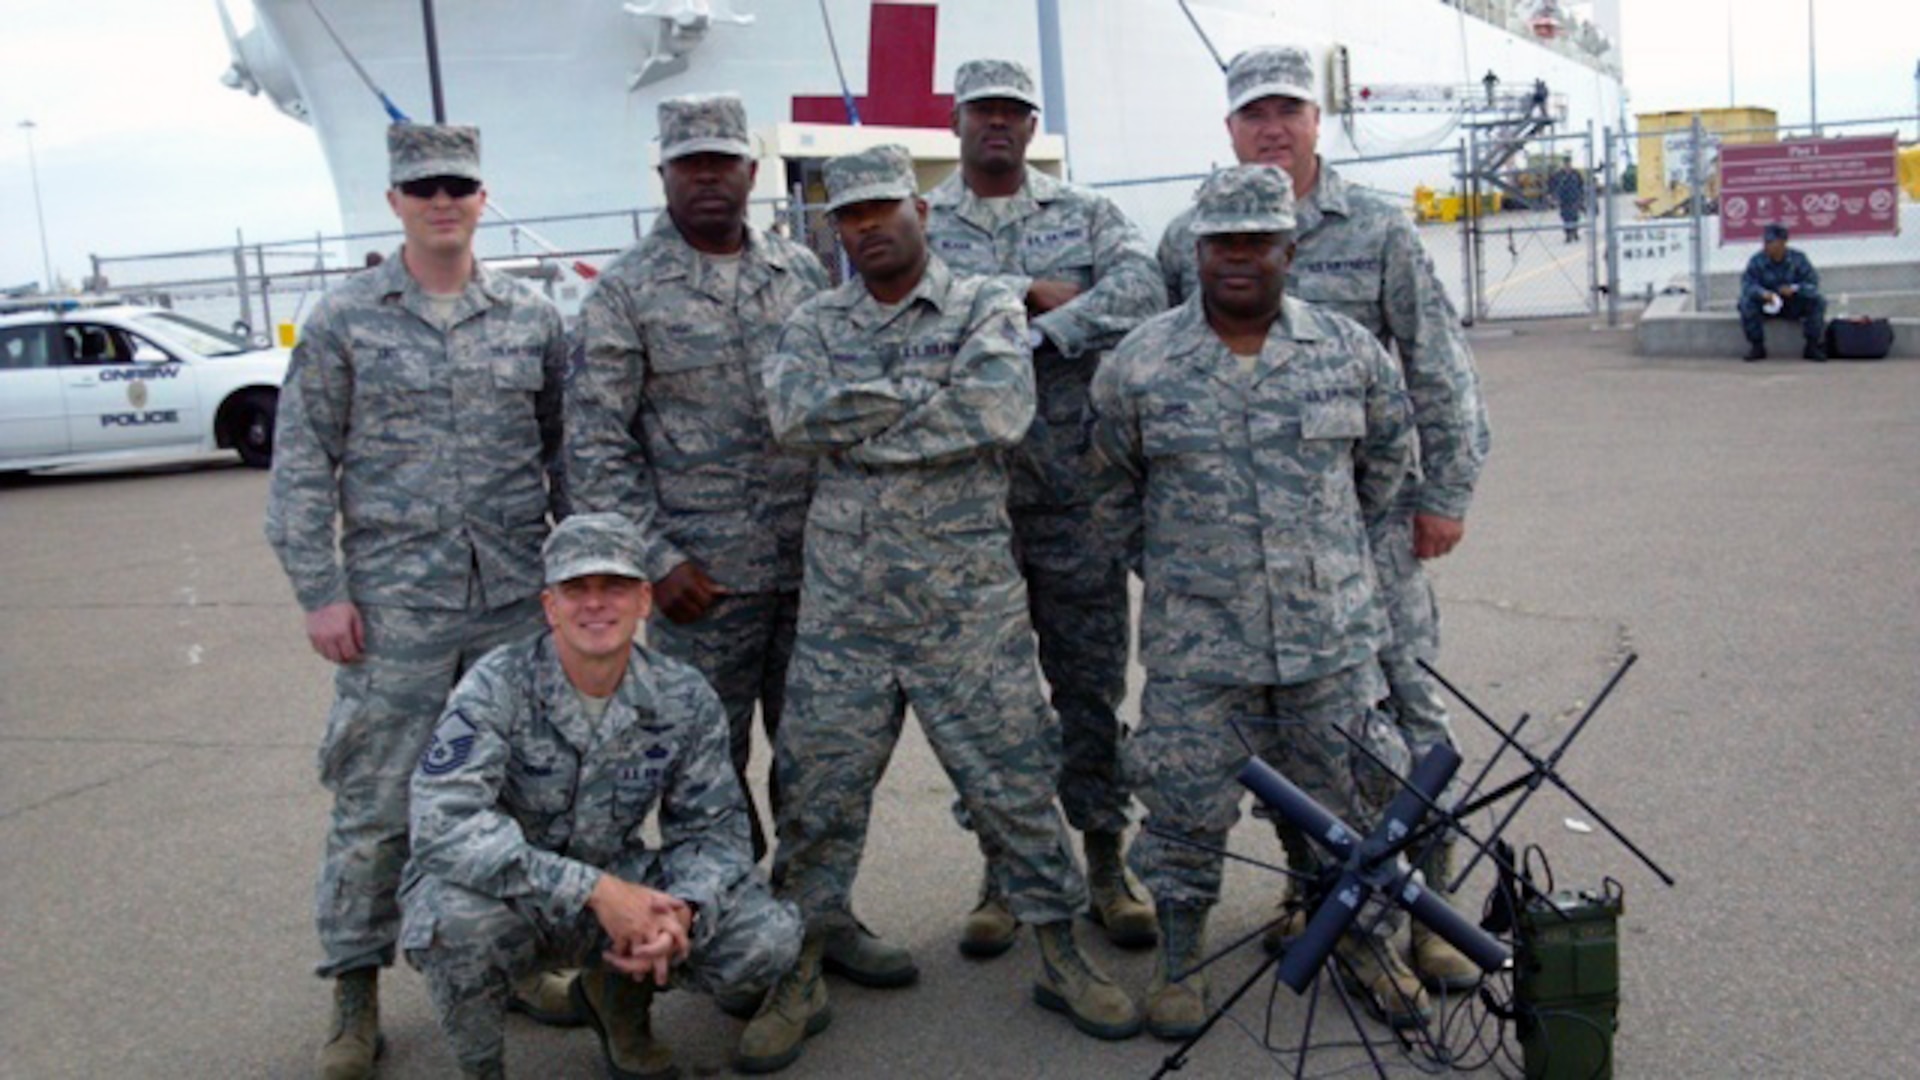 Seven members of the Joint Communications Support Element, a subordinate command of the Joint Enabling Capabilities Command embark on the USNS Mercy in support of Operation Pacific Partnership 2012. The team, all members of the 224th Joint Communications Support Squadron, a Georgia Air National Guard unit aligned to JCSE, will provide essential unclassified and classified communications capabilities throughout the duration of the mission.